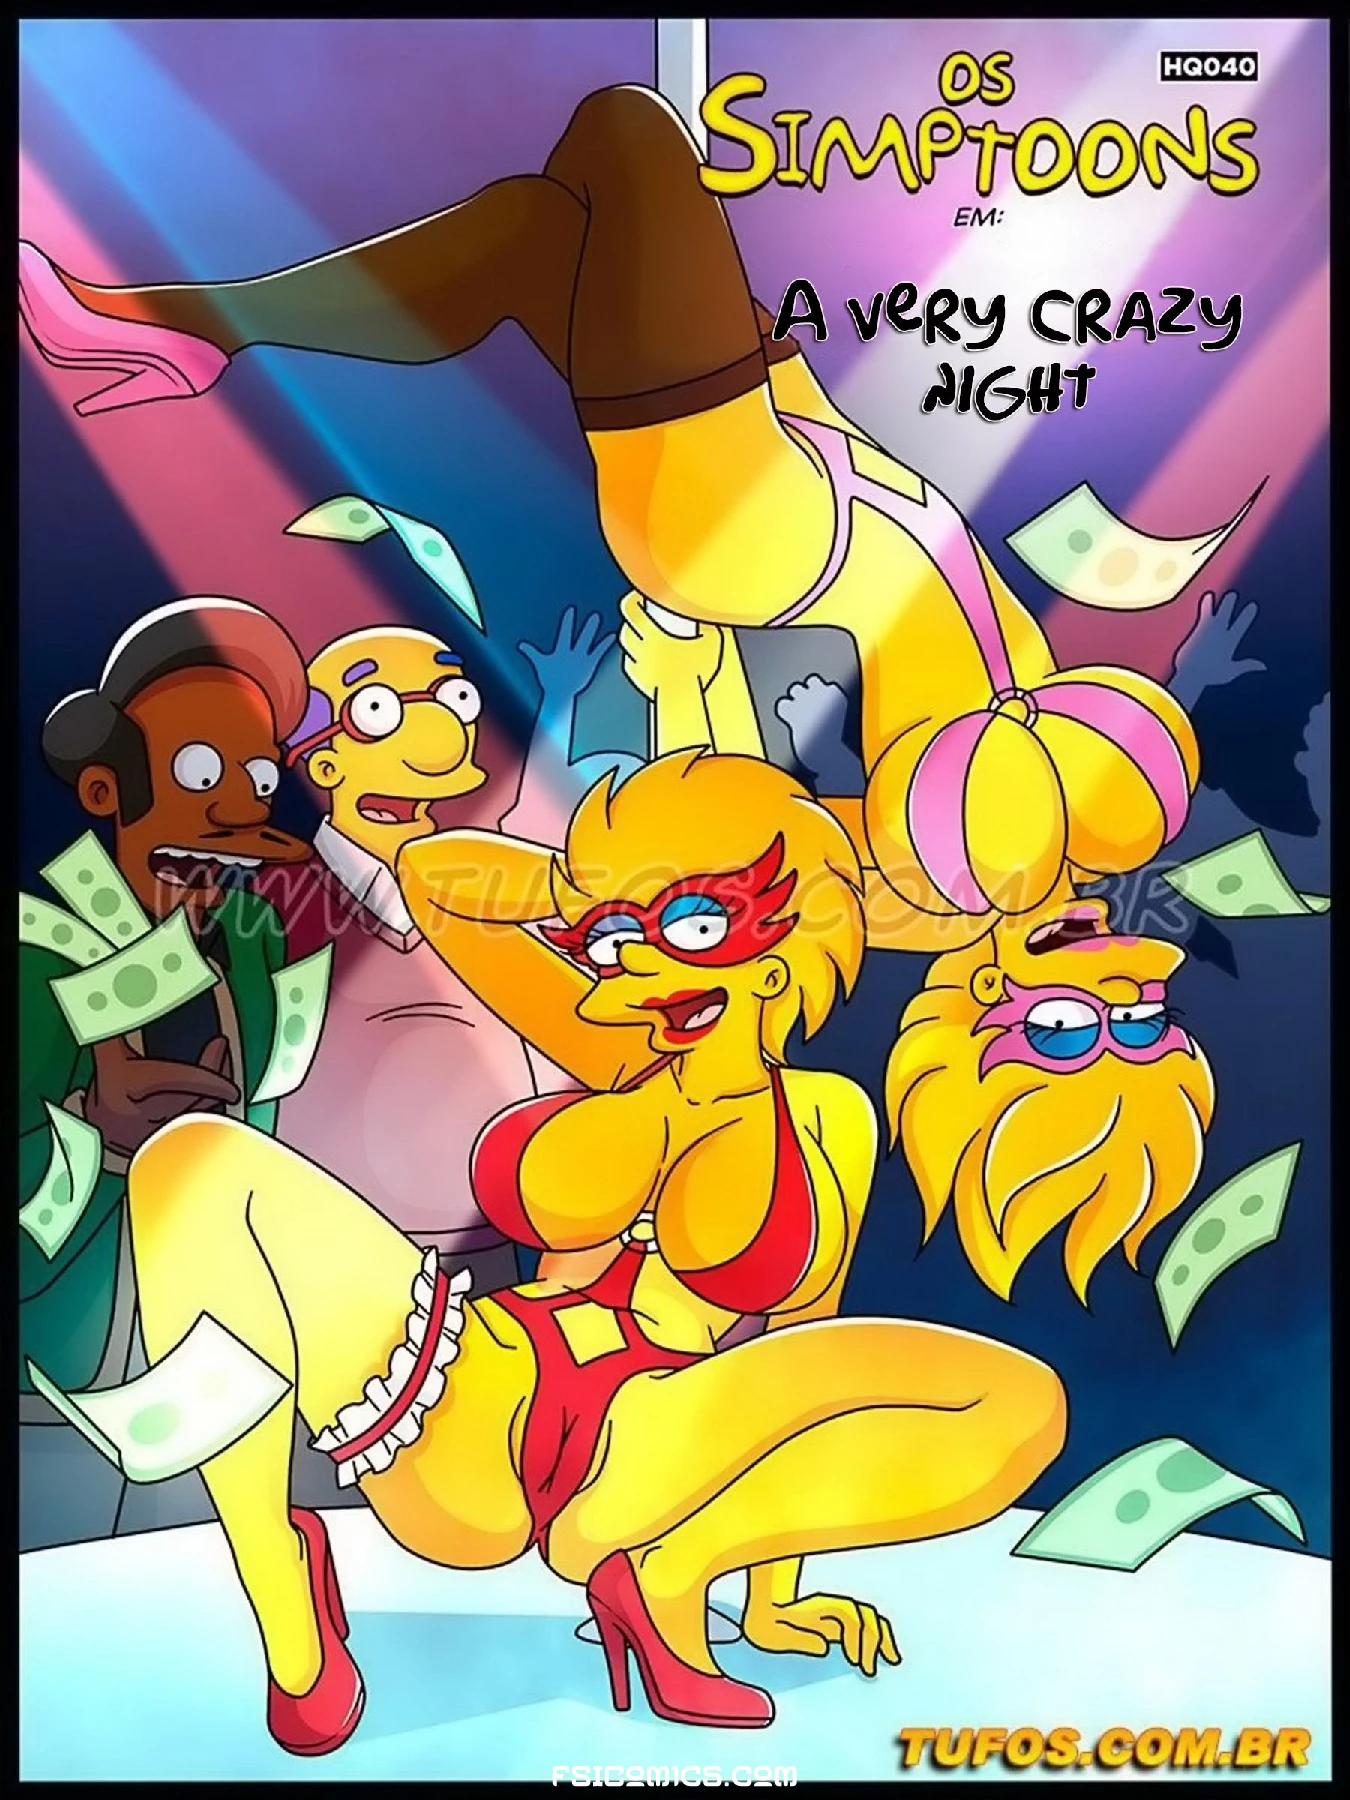 The Simpsons Chapter 40 – A Very Crazy Night – WC TF - 27 - FSIComics